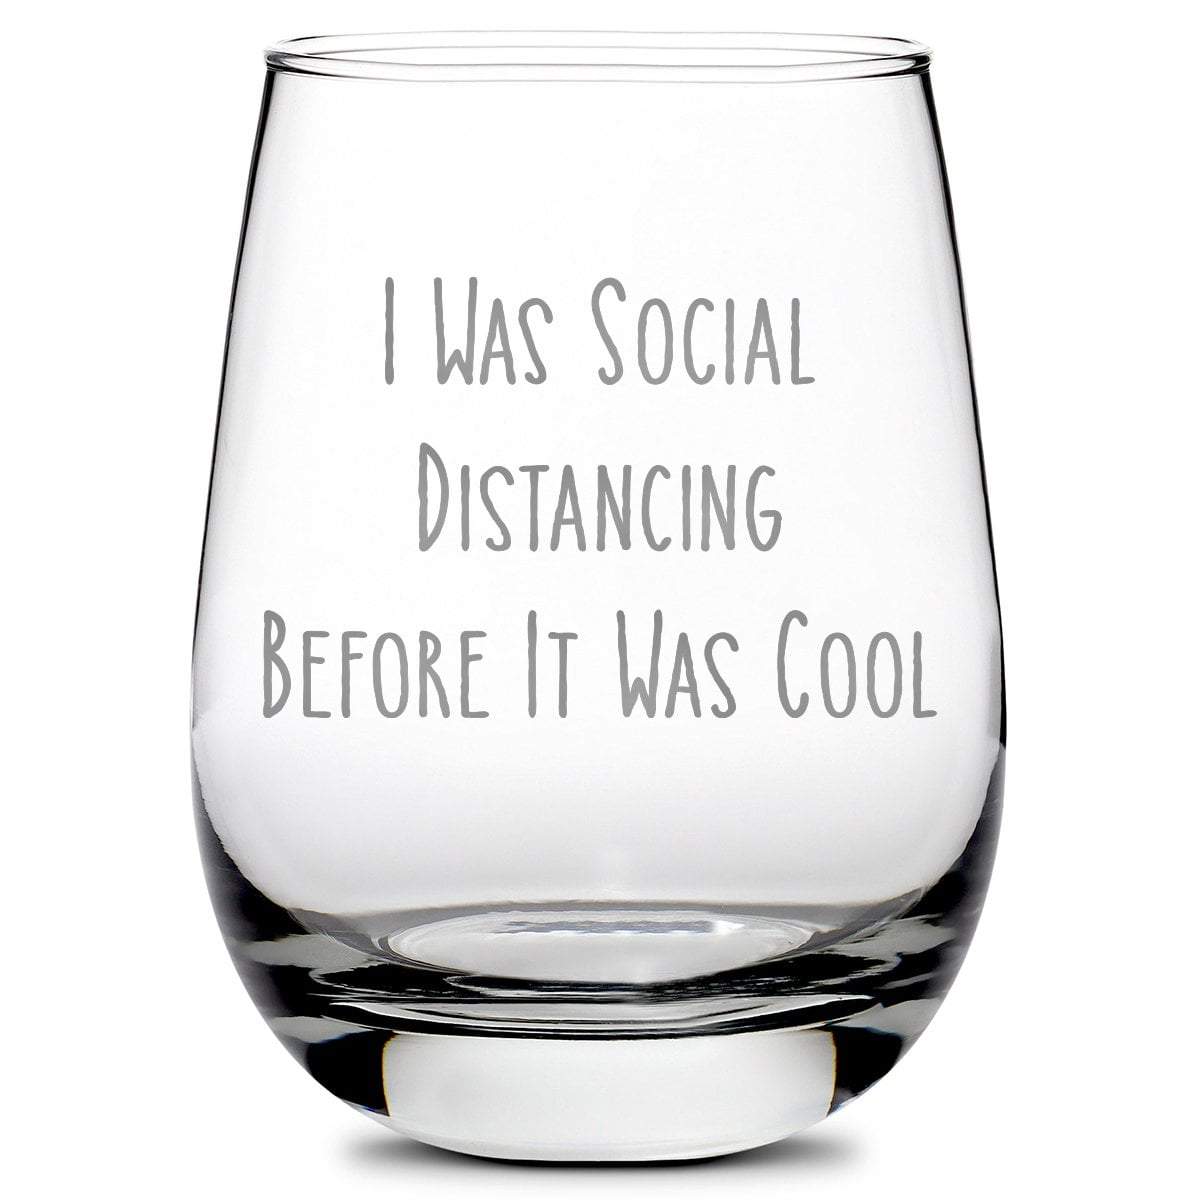 Premium Coronavirus Wine Glass - Hand-Etched Social Distancing Drinking Glasses,  Made in USA, 11oz